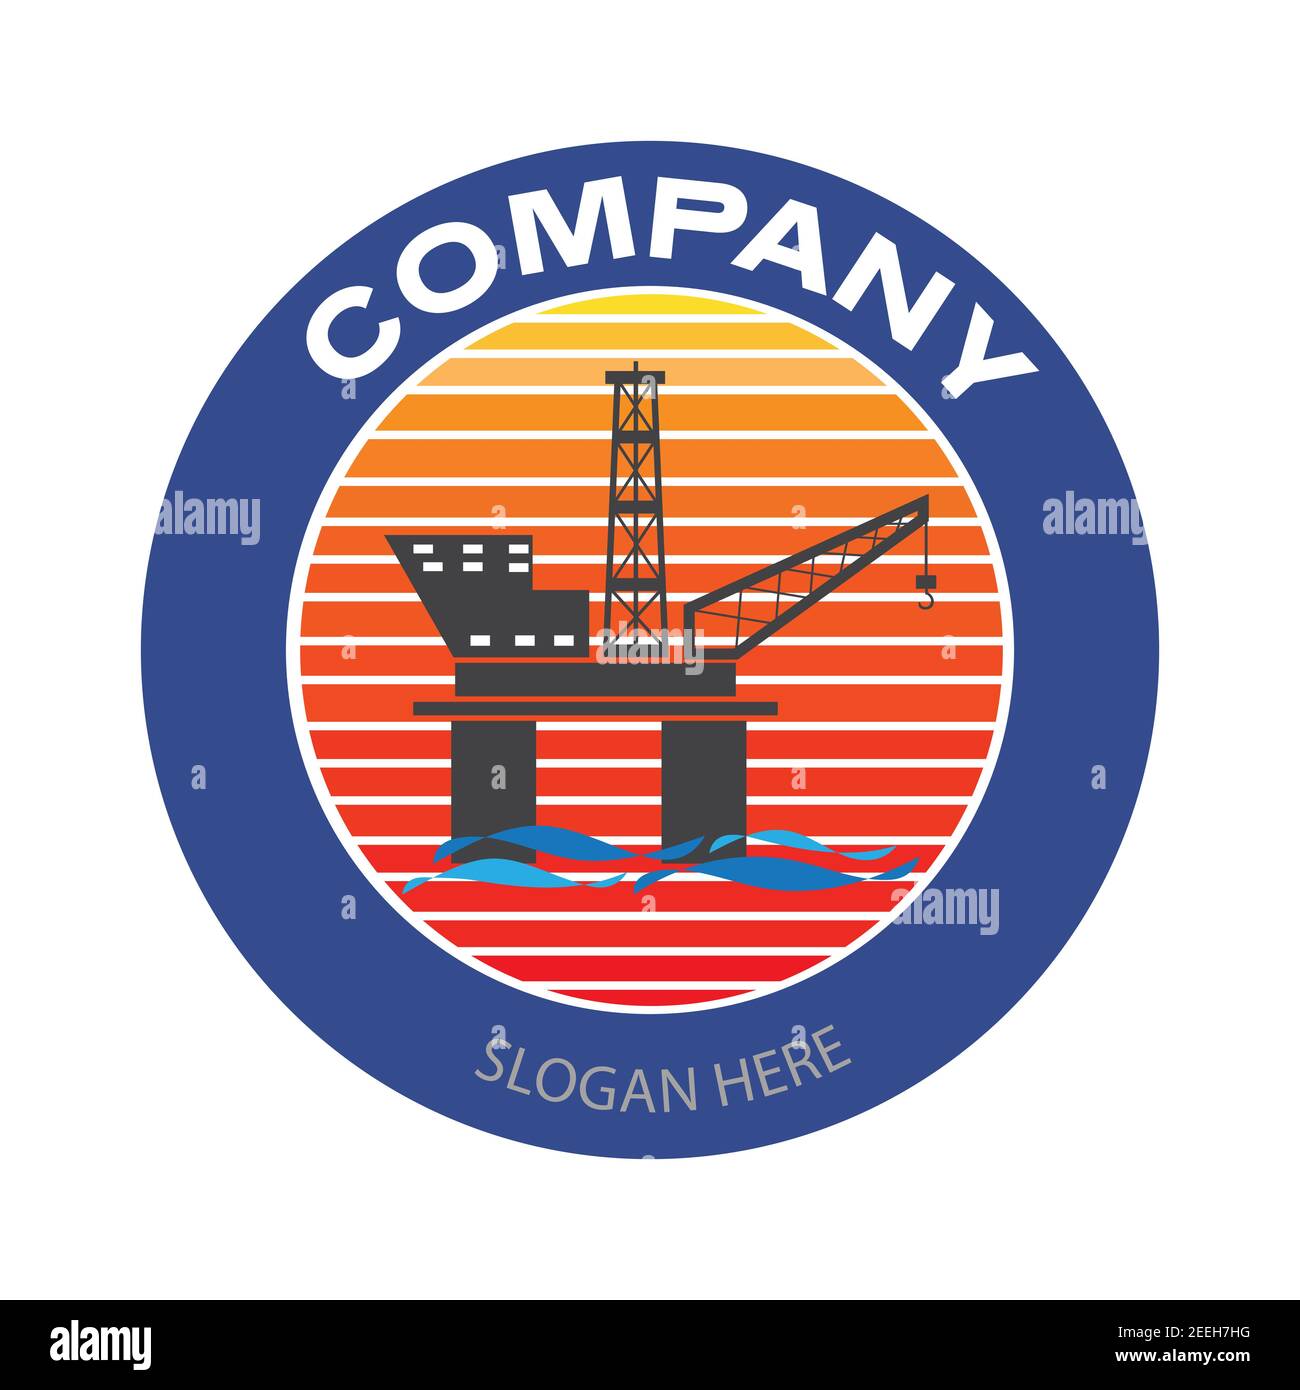 Drilling rig company logo. Offshore oil platform badge in circle. Oil and gas industry vector illustration design Stock Vector